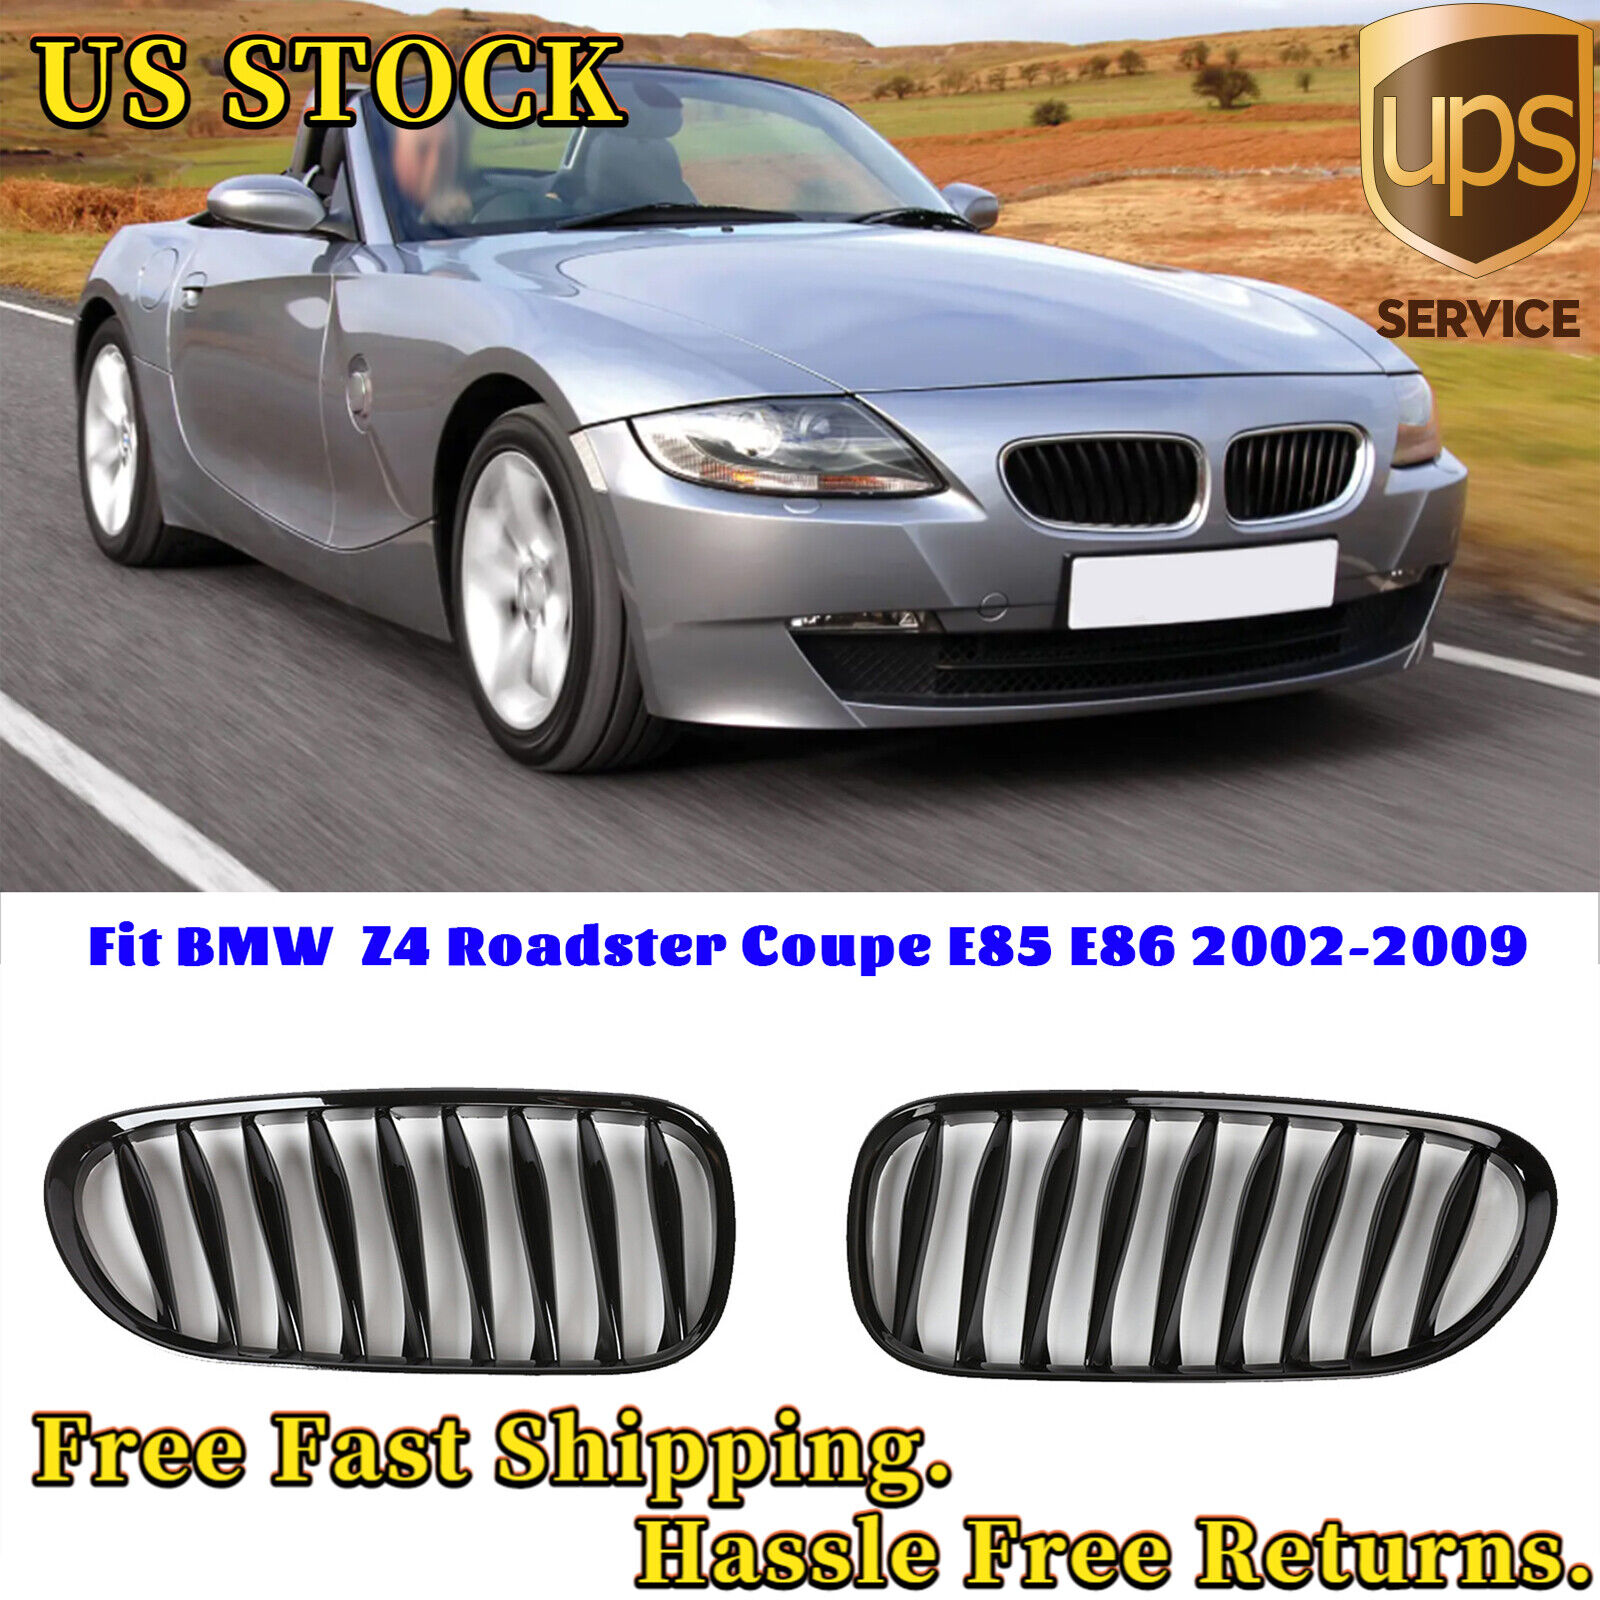 Front Bumper Kidney Grilles Grill For BMW Z4 E85 E86 Coupe Roadster Gloss Black